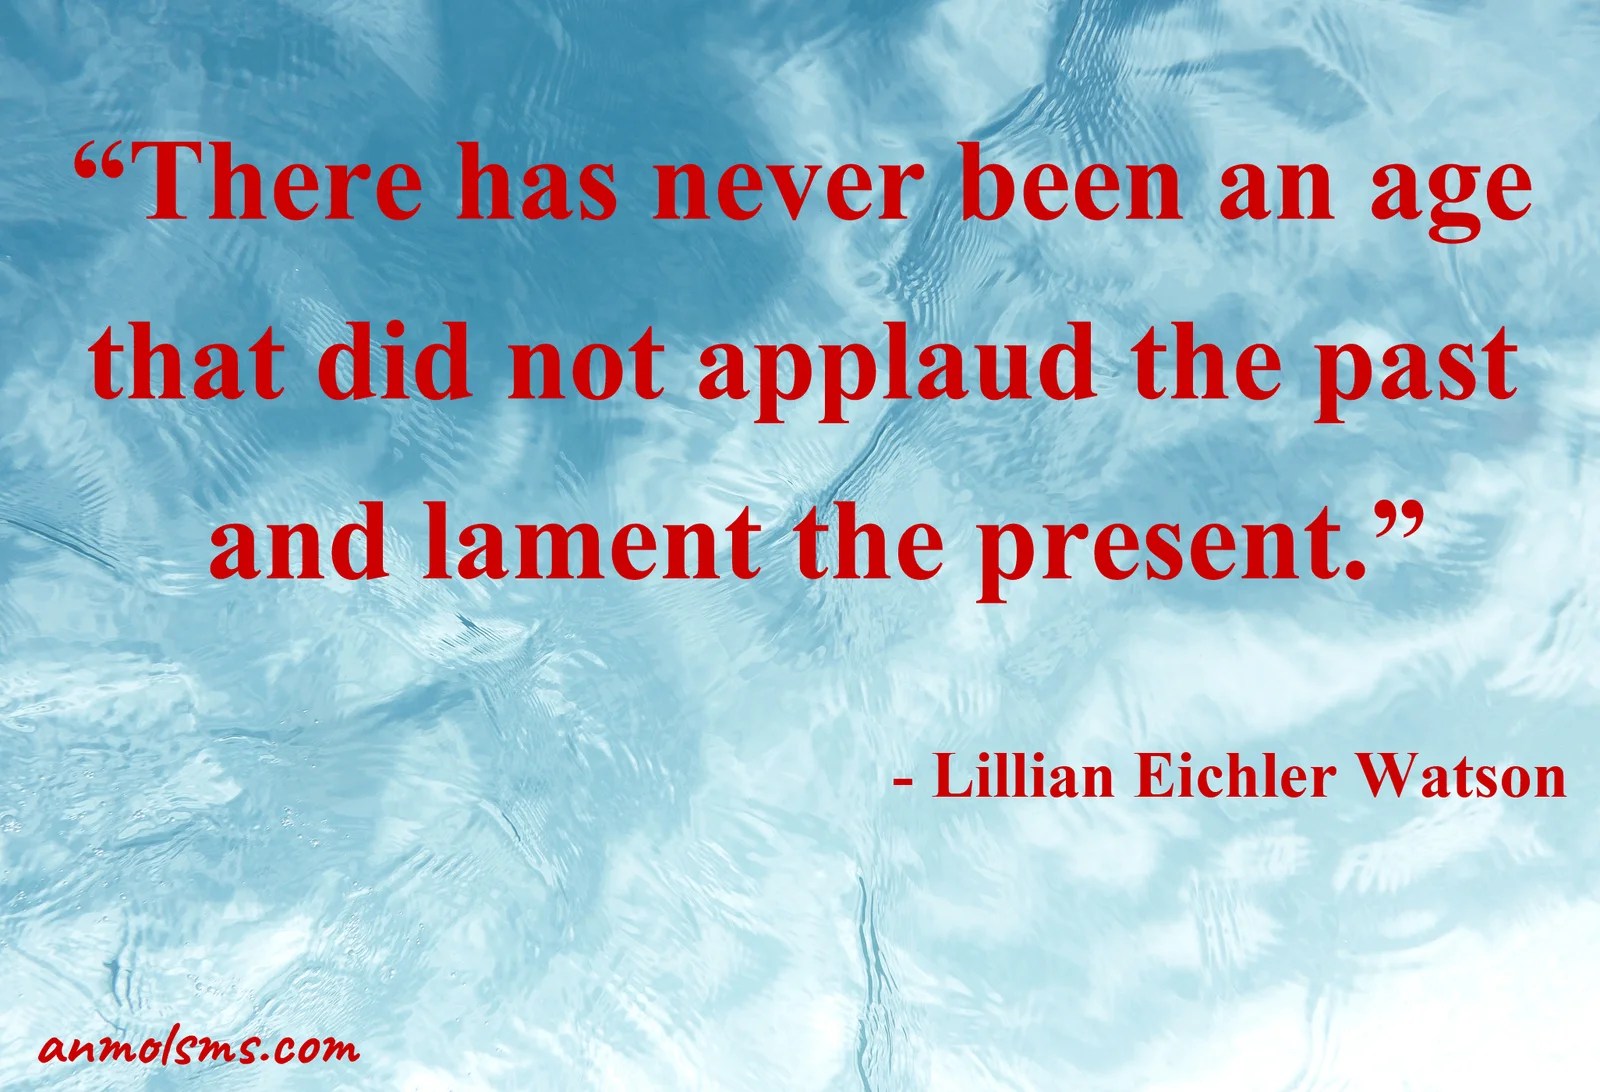 There has never been an age that did not applaud the past and lament the present.‐ Lillian Eichler Watson